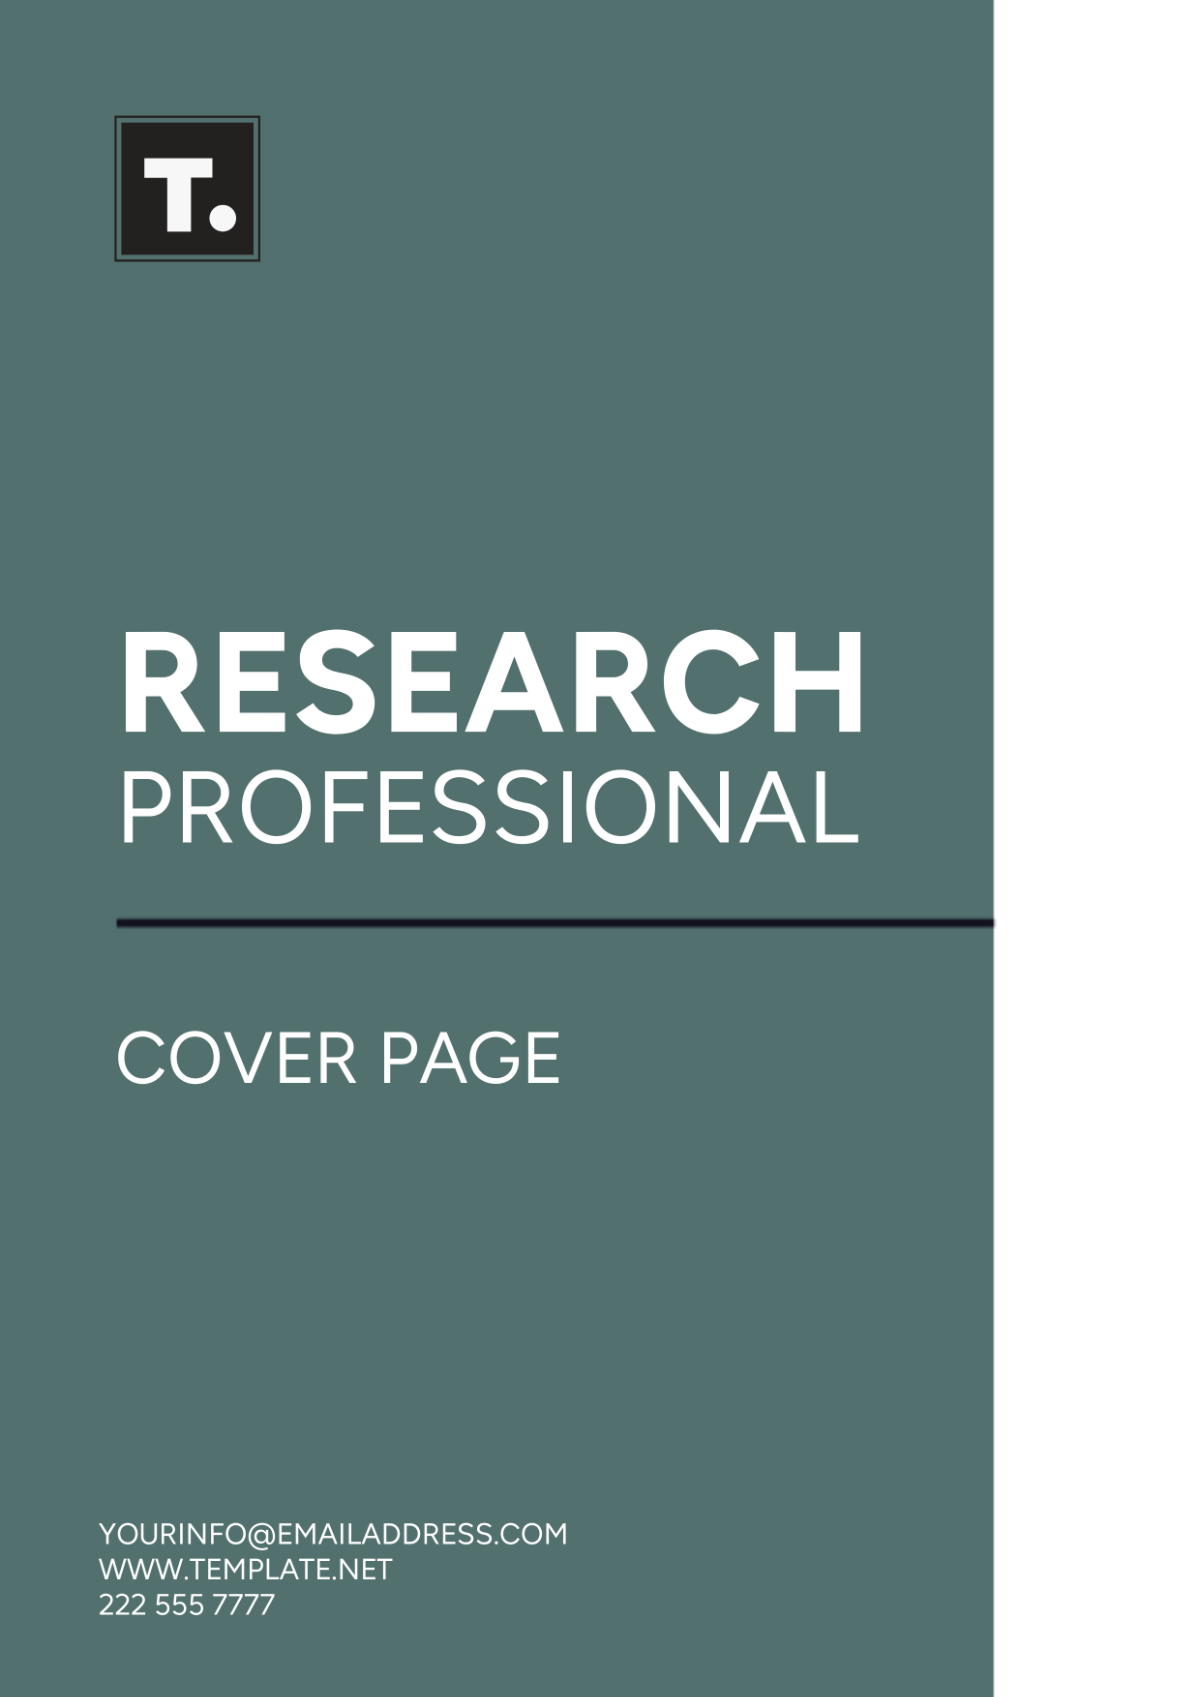 Research Professional Cover Page Template